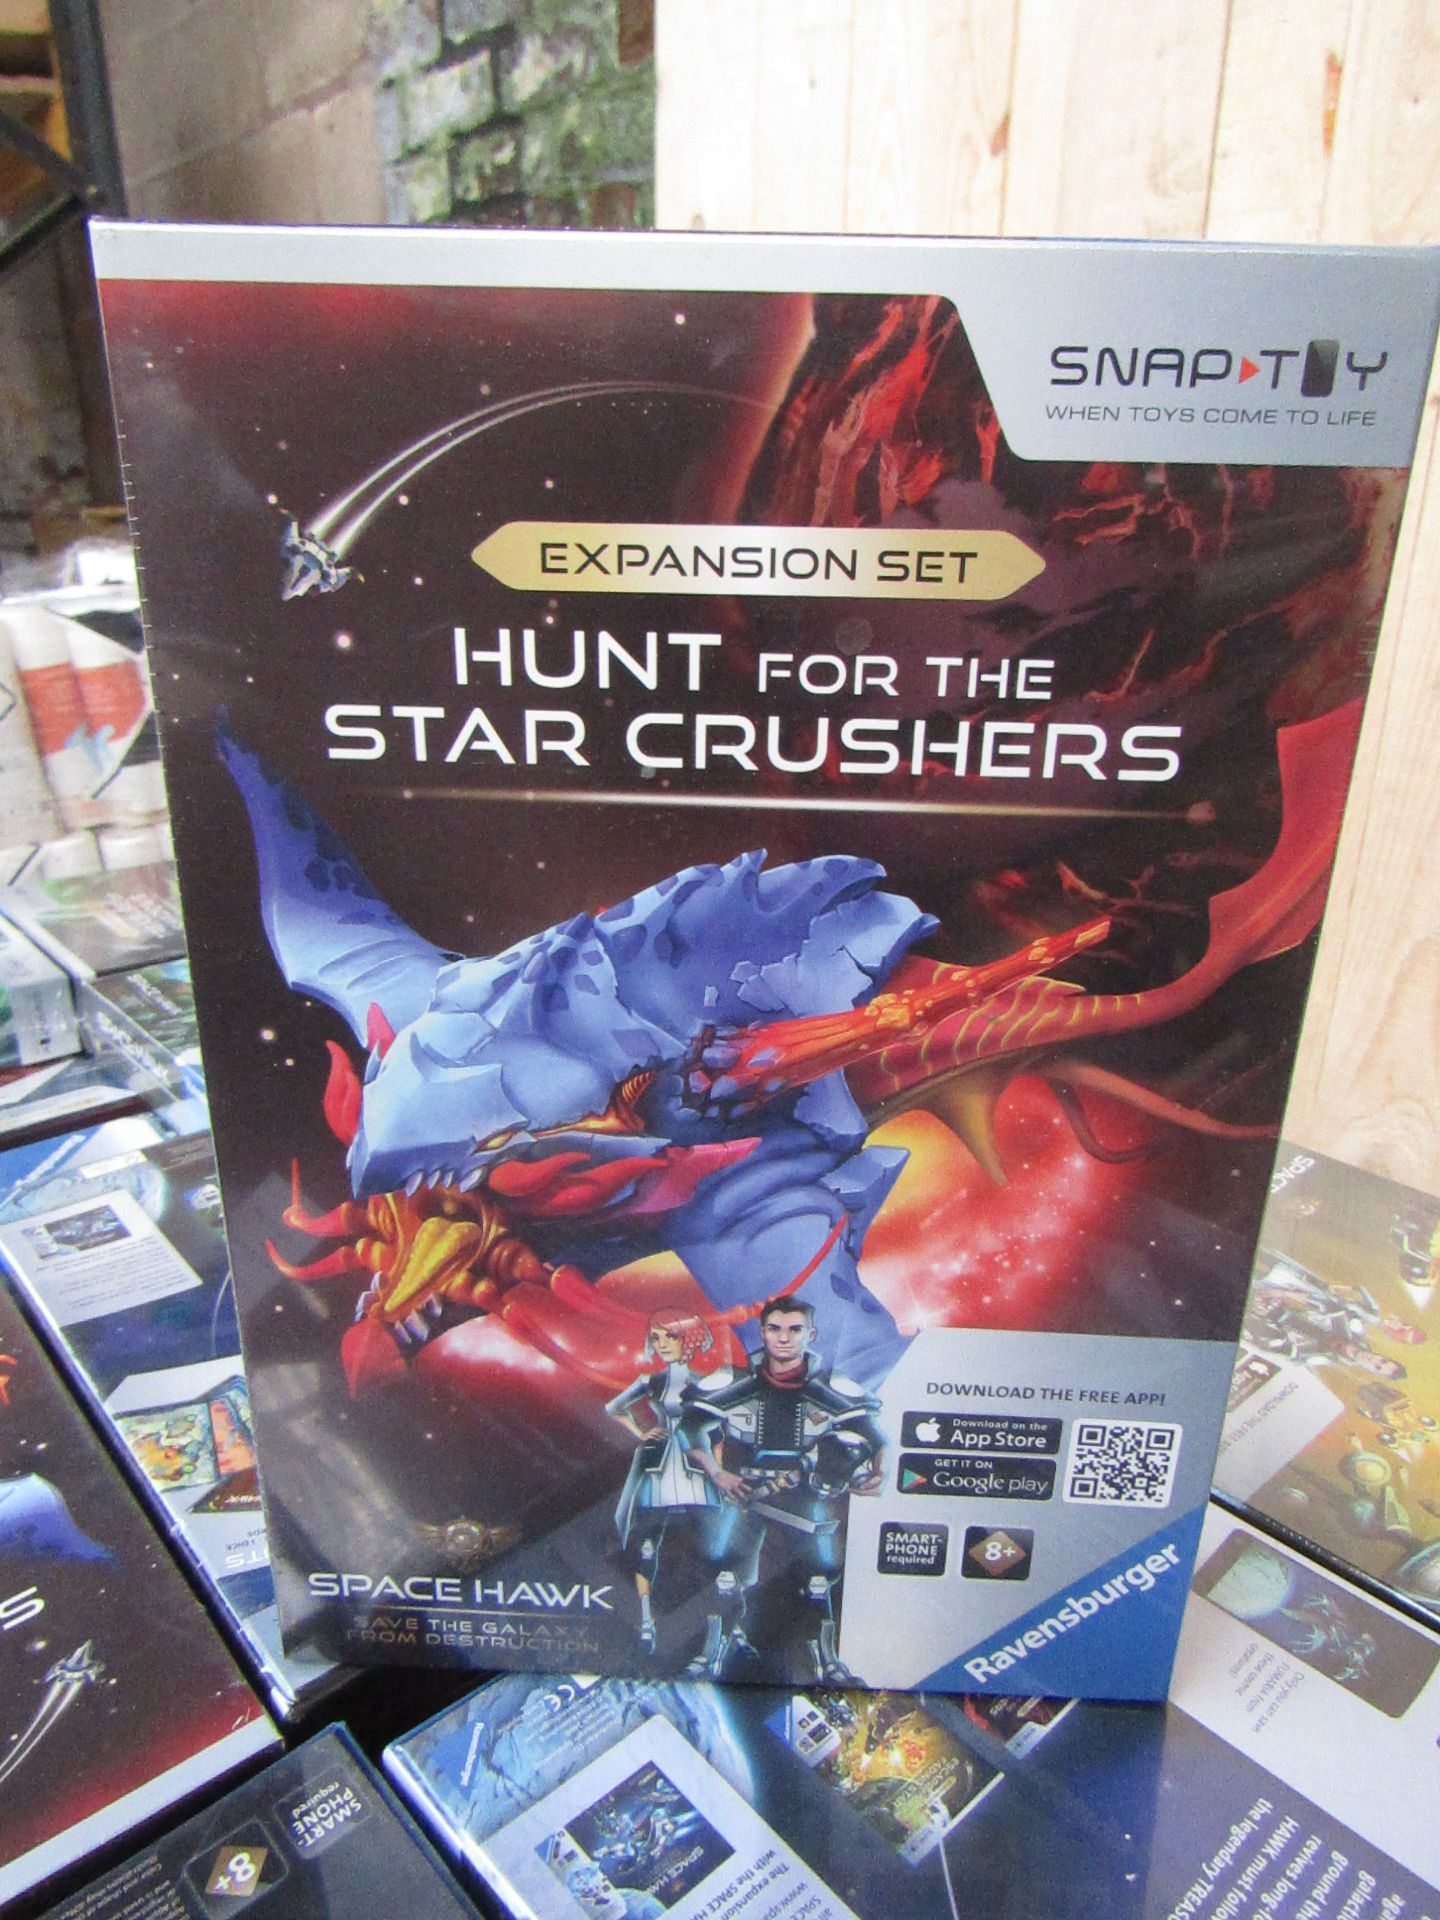 Ravensburger Space Hawk Expansion Set app based toy, new and sealed, please note this will be picked